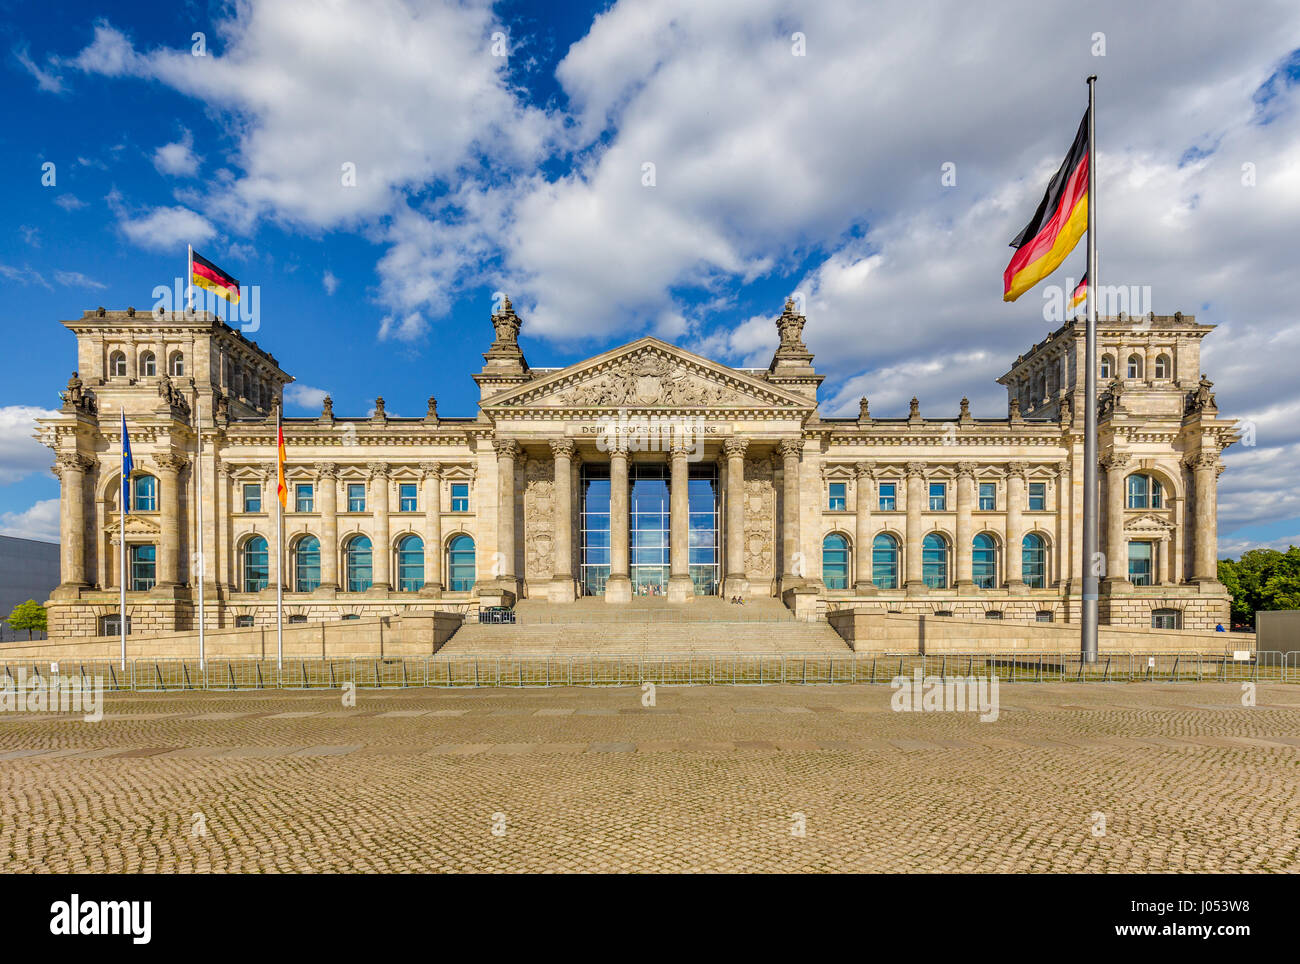 Panoramic view of famous Reichstag building, seat of the German Parliament (Deutscher Bundestag), in beautiful golden evening light at sunset, Berlin Stock Photo